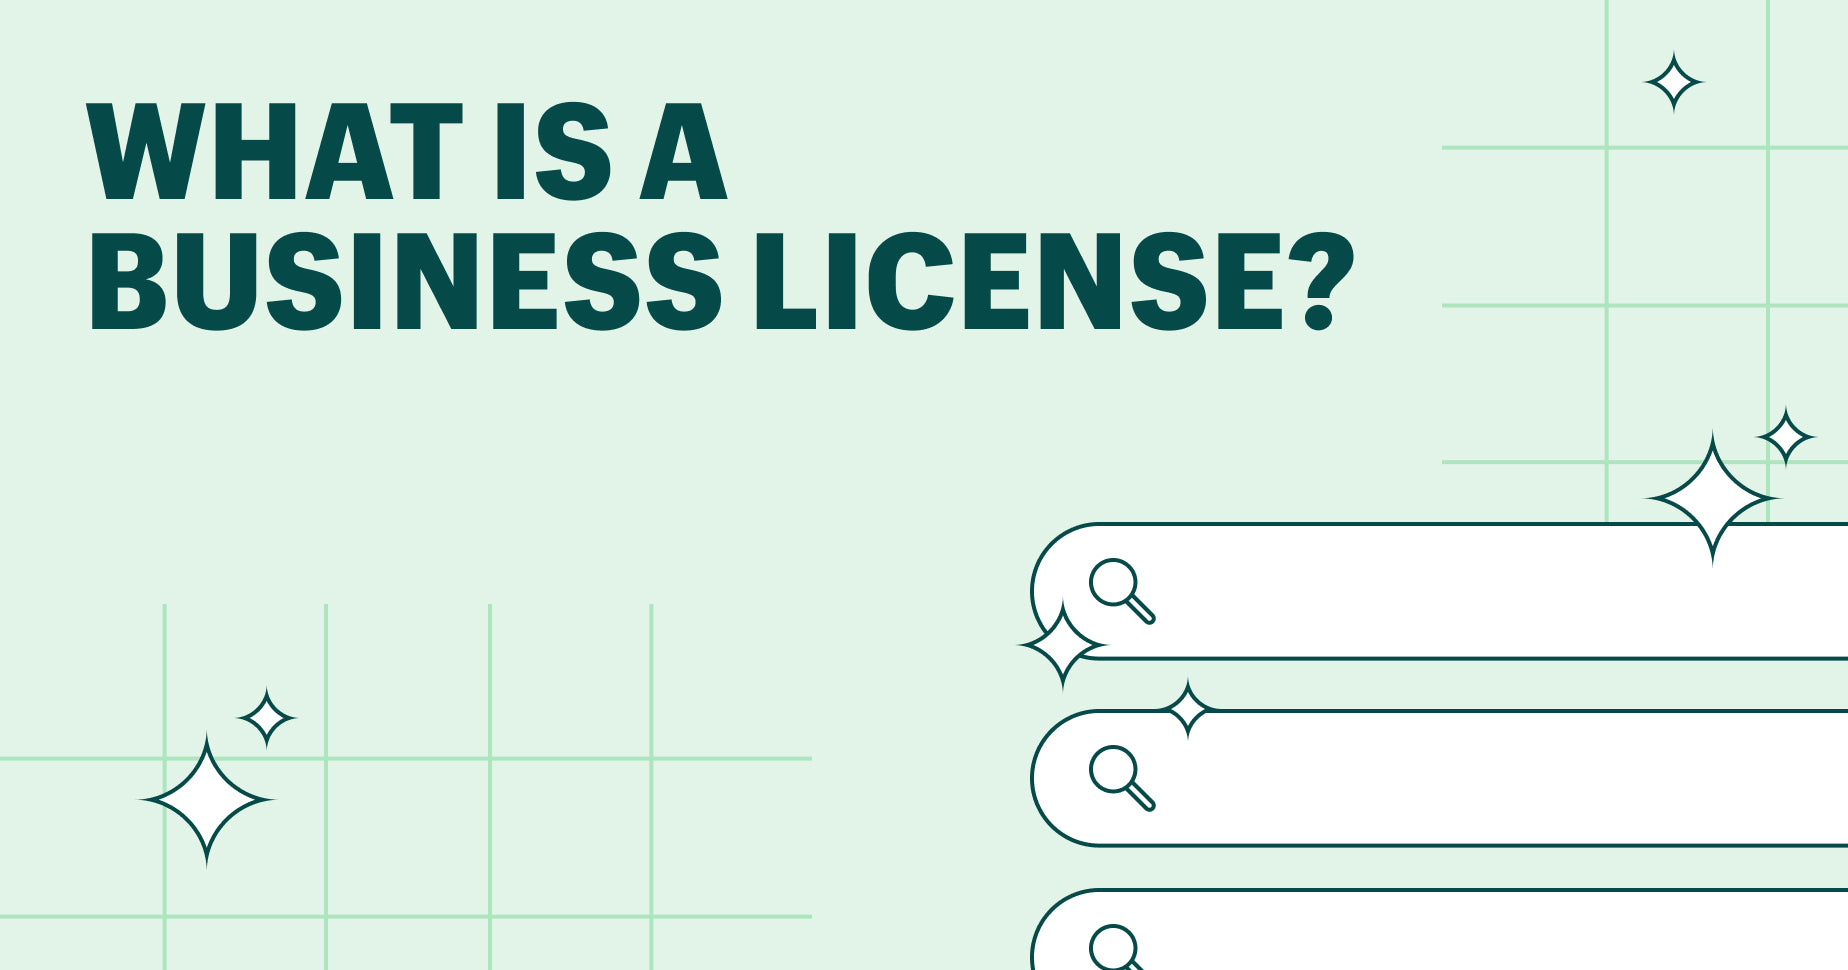 License Global: Brand Licensing and Consumer Product News and Reports